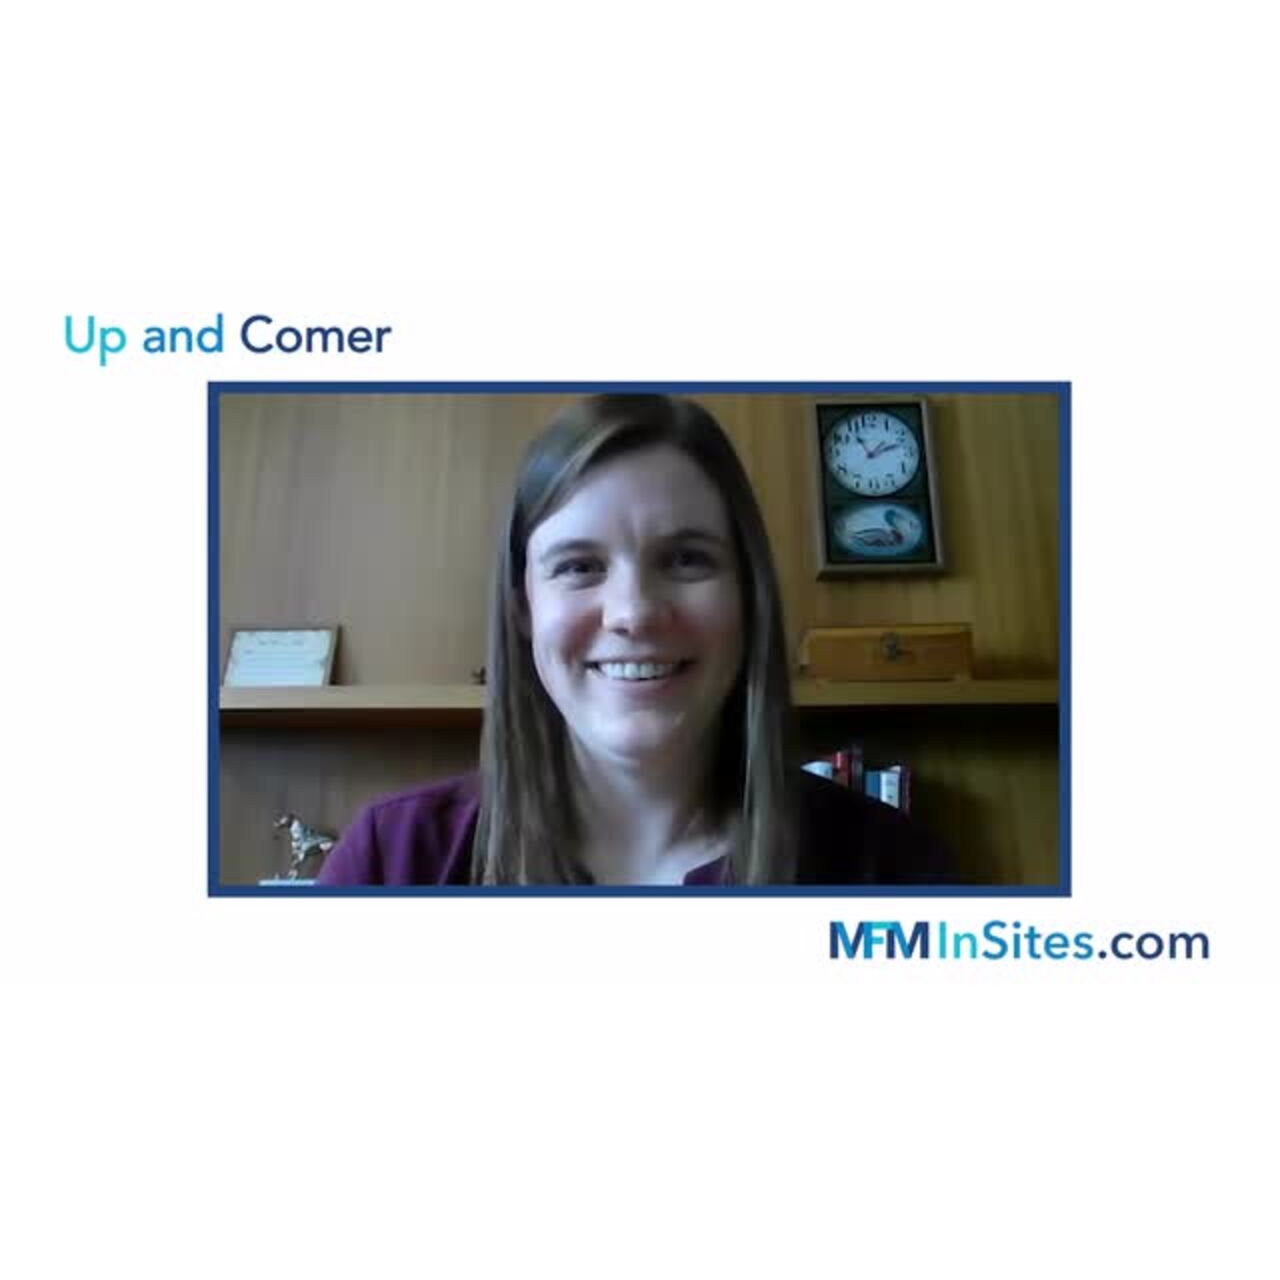 Cover image for  article: MFM's New "Up and Comer" Series, Featuring Megan Austin of Midwest Communications (Video)